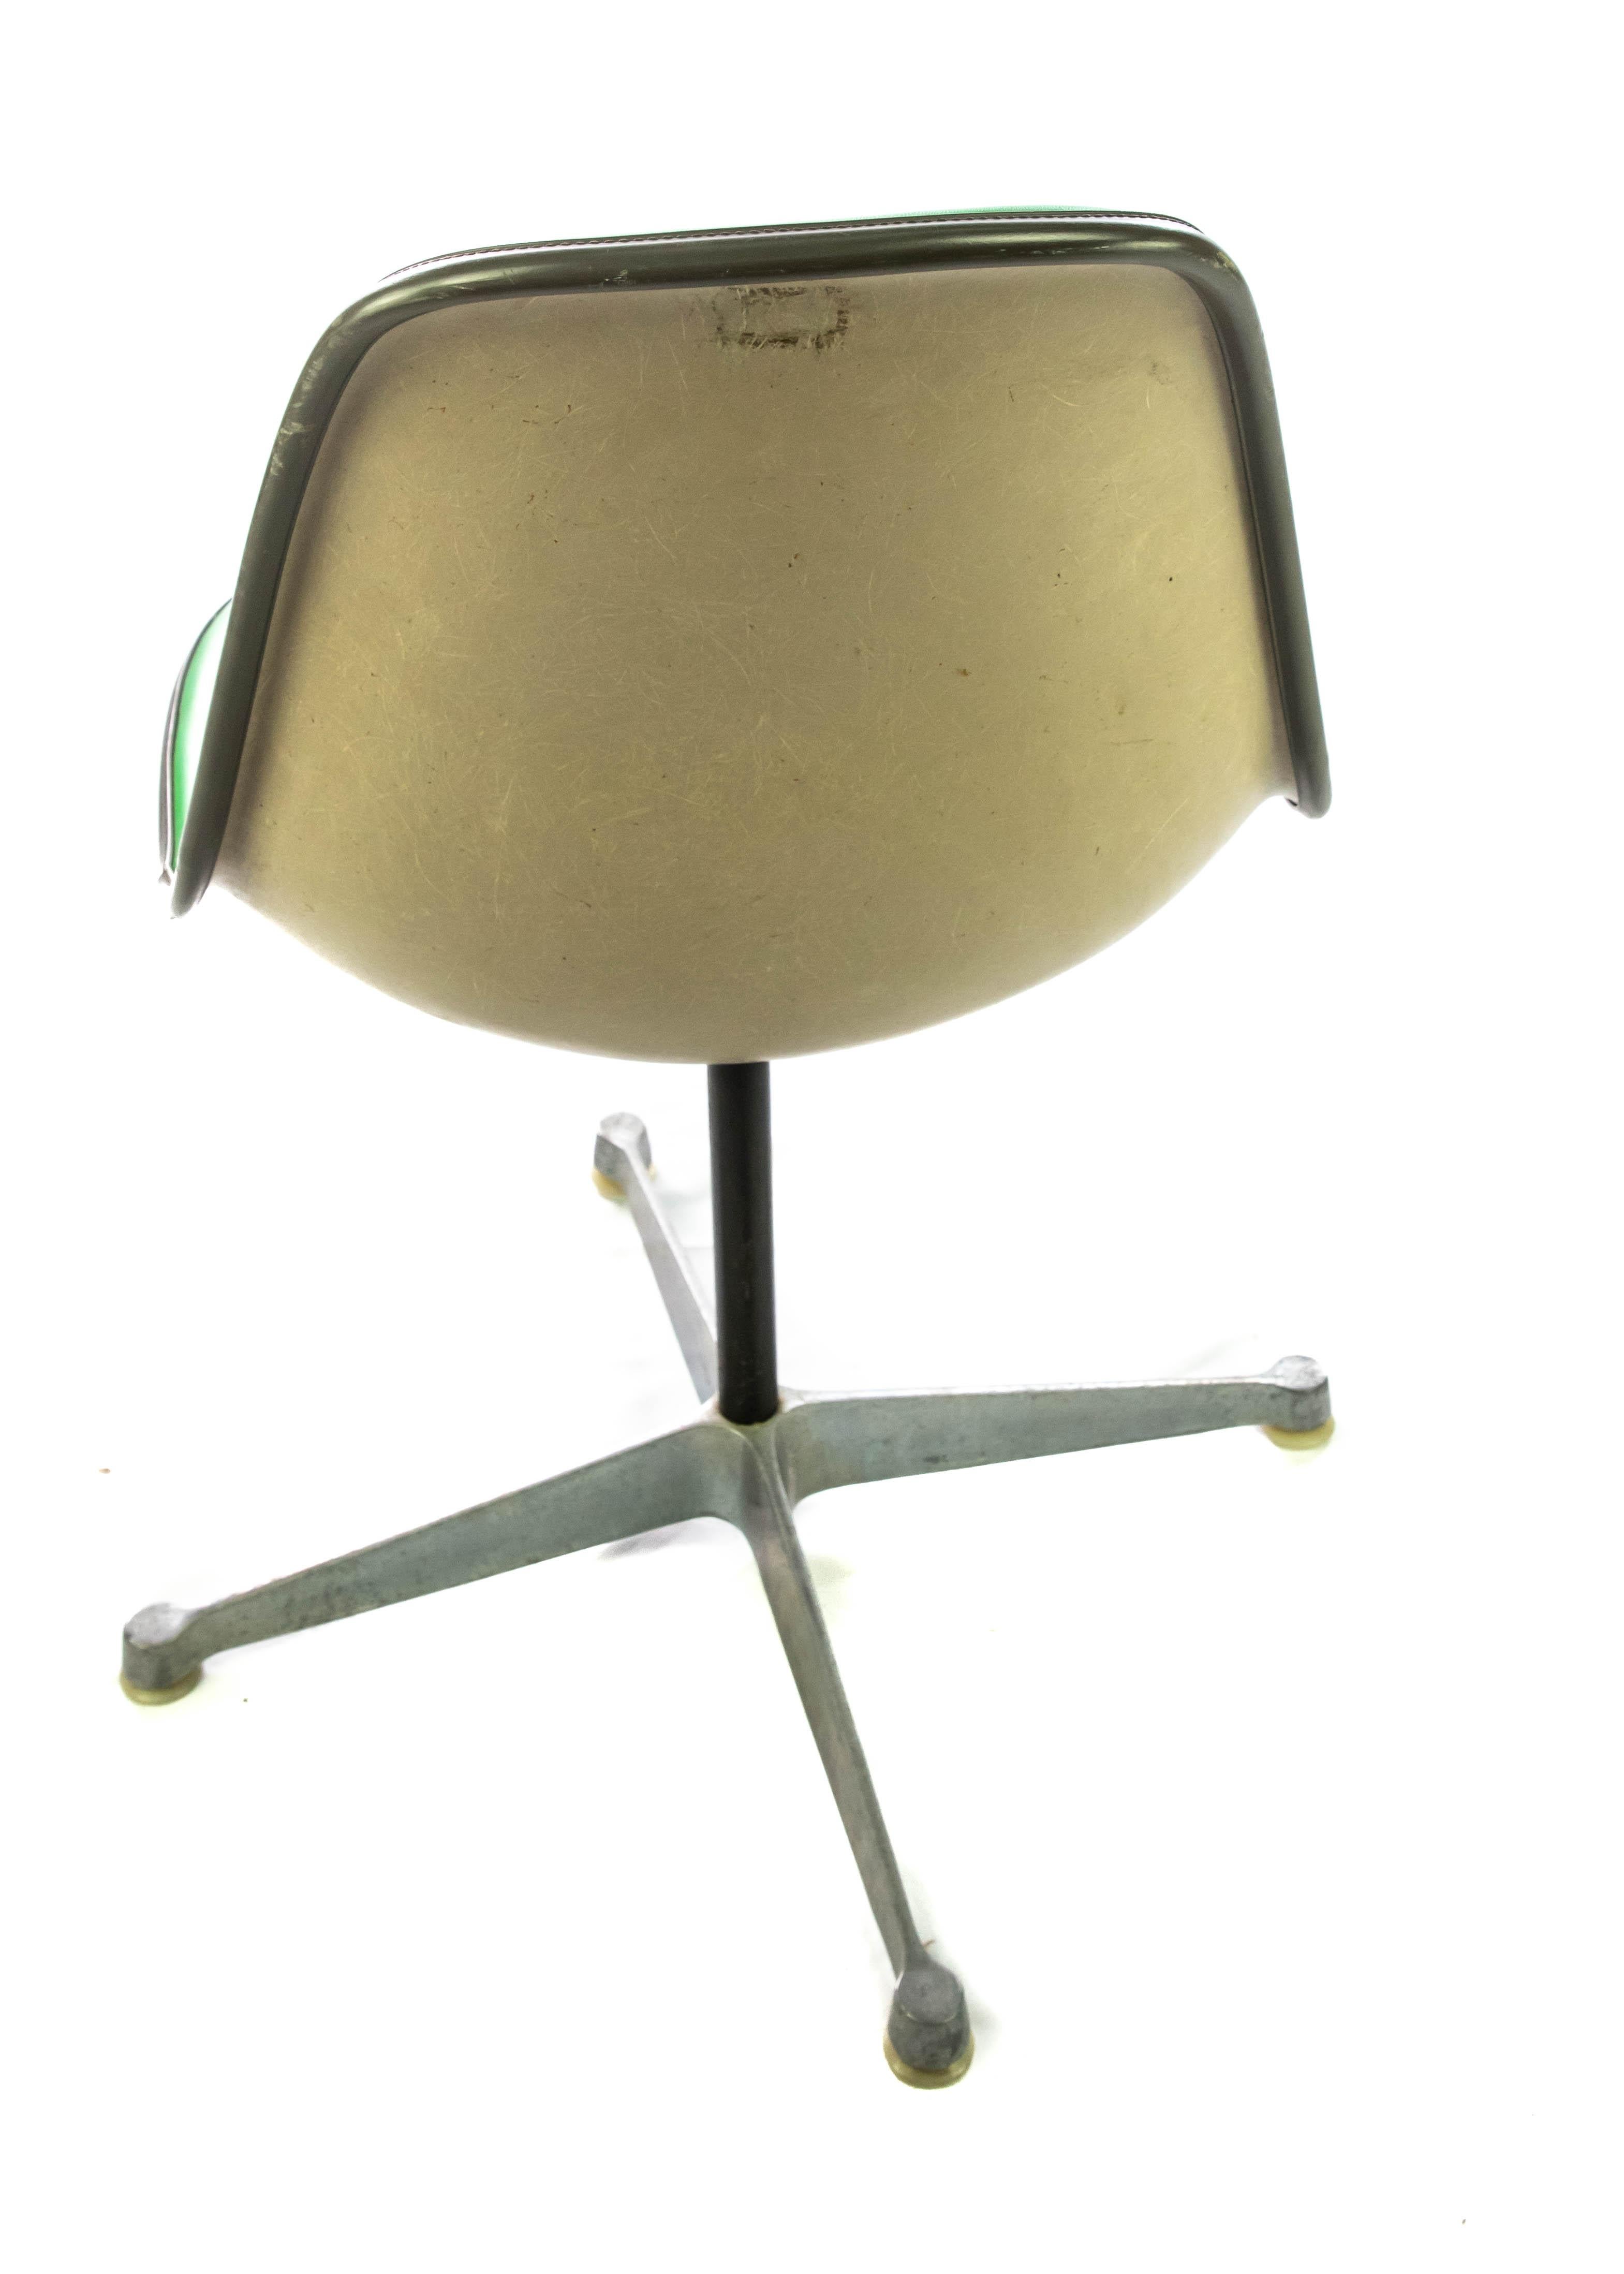 Eames for Herman Miller Bright Green Chairs im Zustand „Gut“ im Angebot in Cookeville, TN